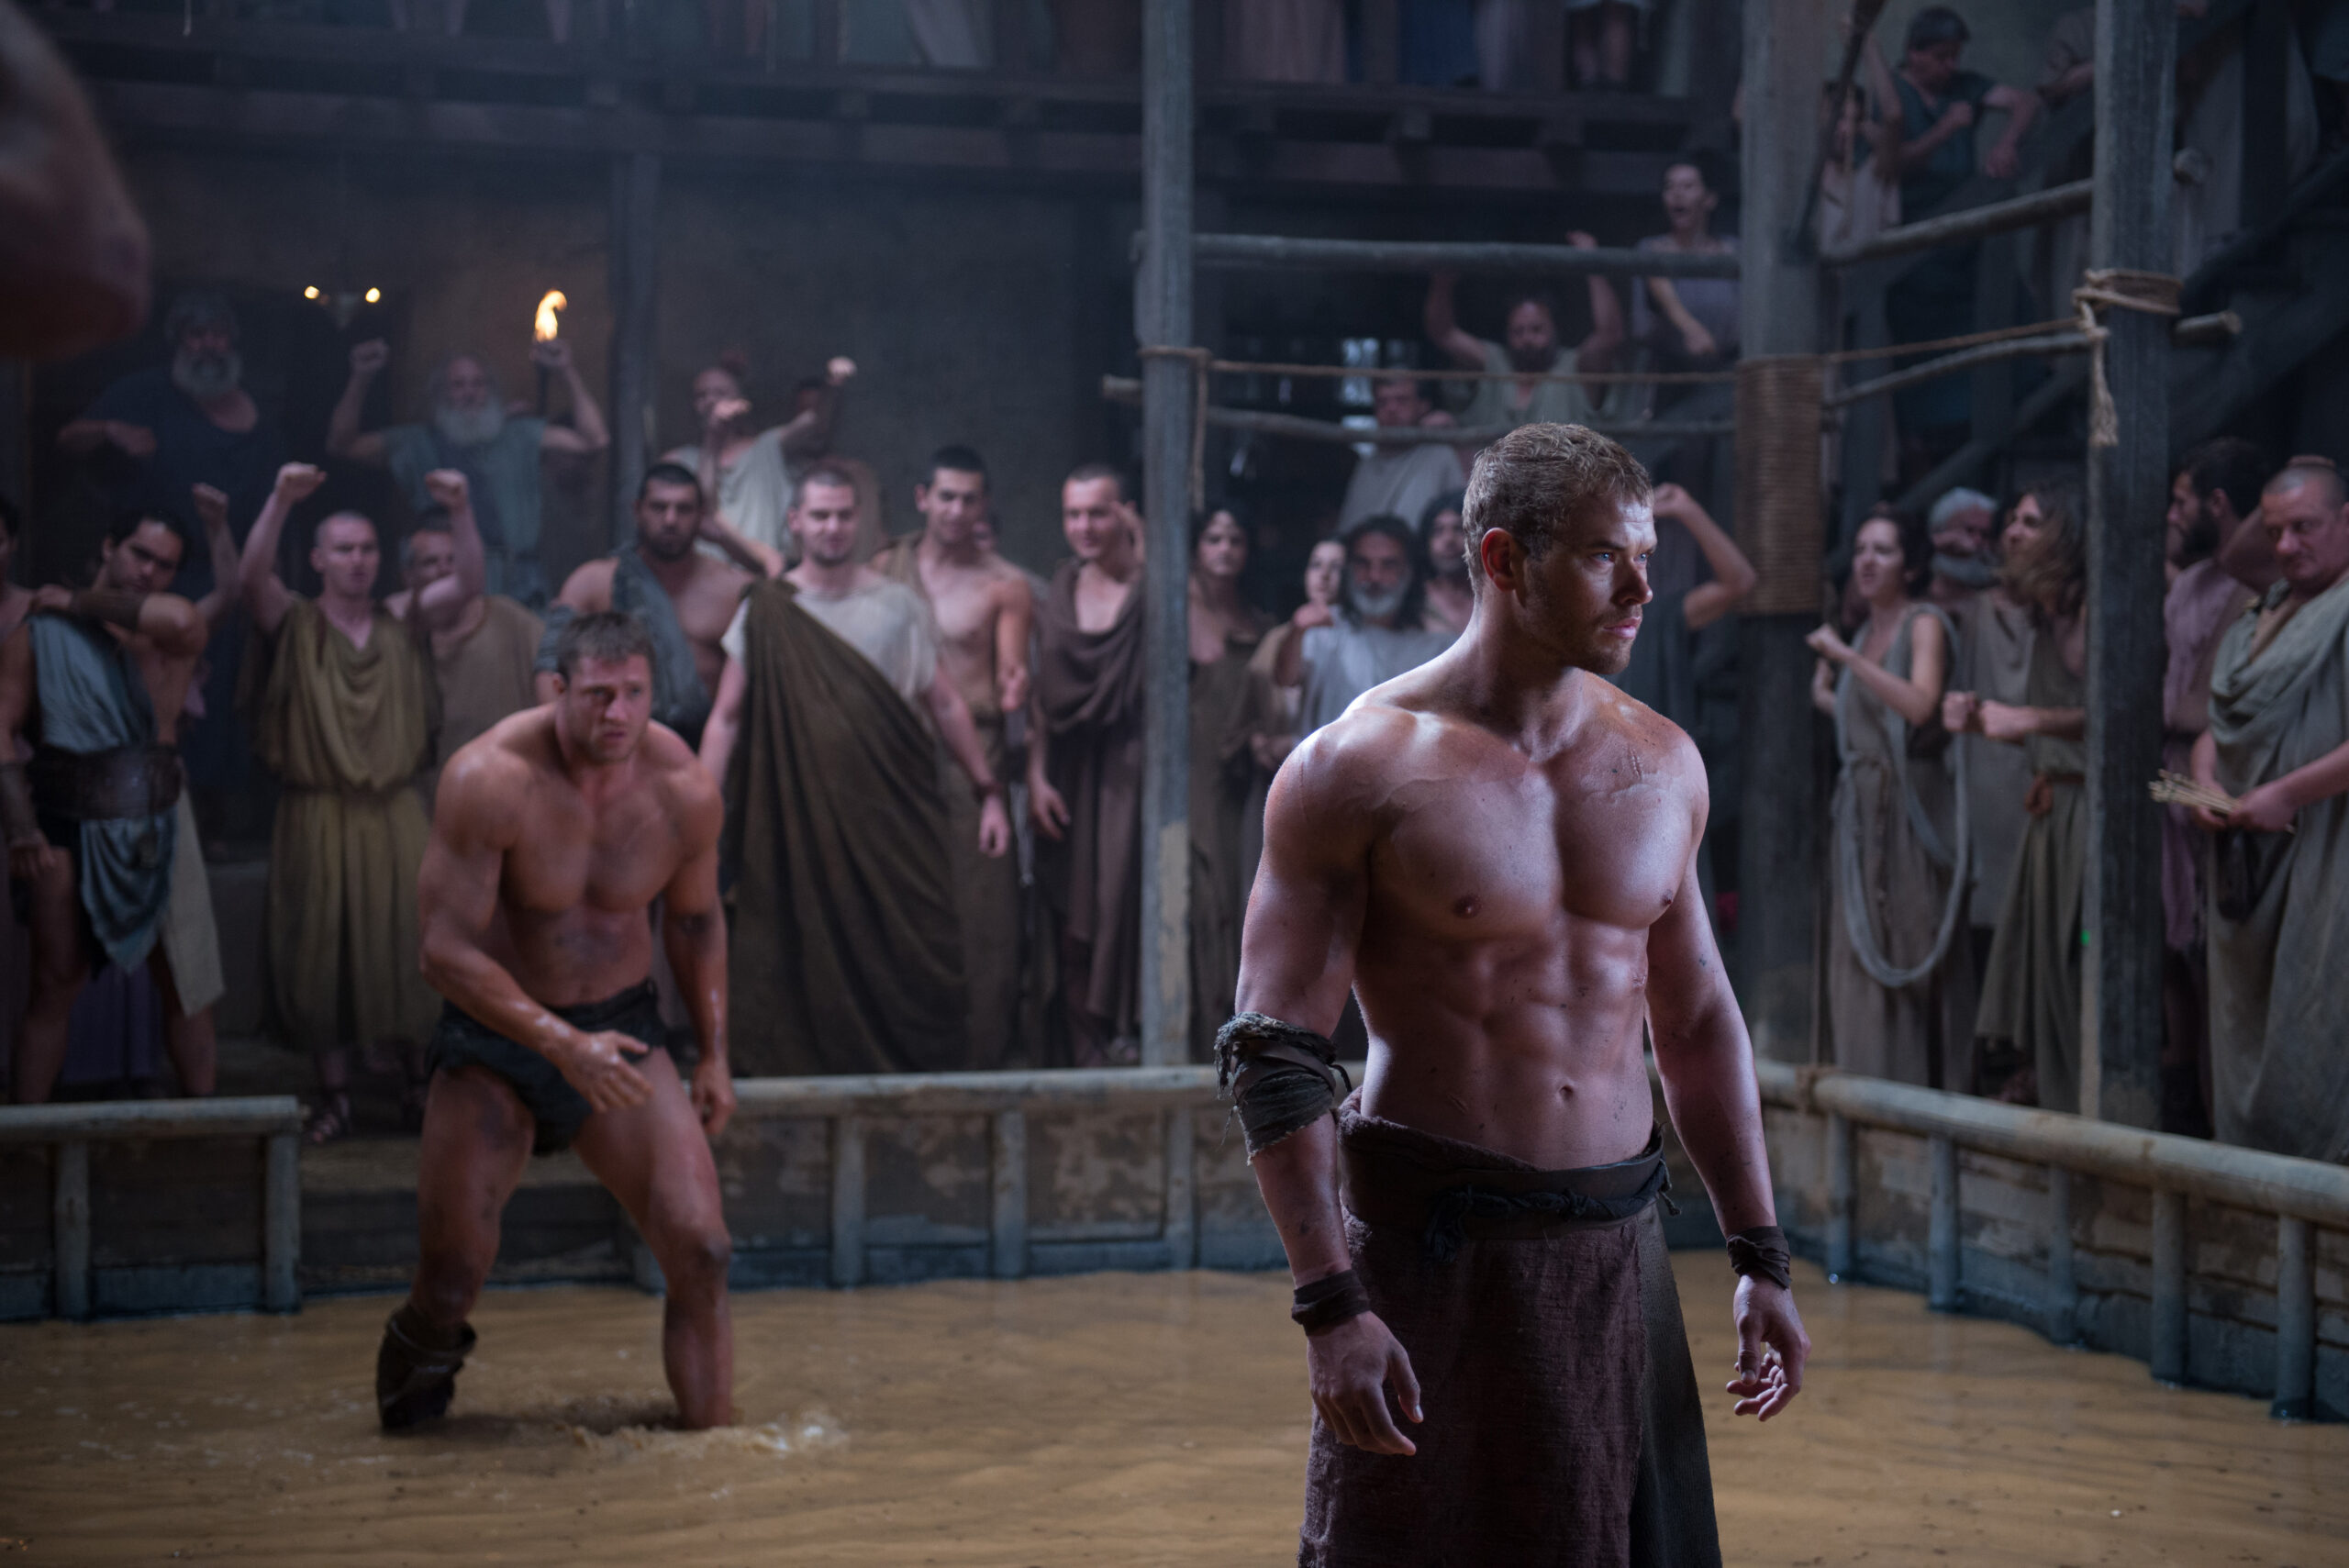 THE LEGEND OF HERCULES - Directed by Renny Harlin - Production Design by Luca Tranchino - Mud Pit Arena - ©2014 - Millennium Films